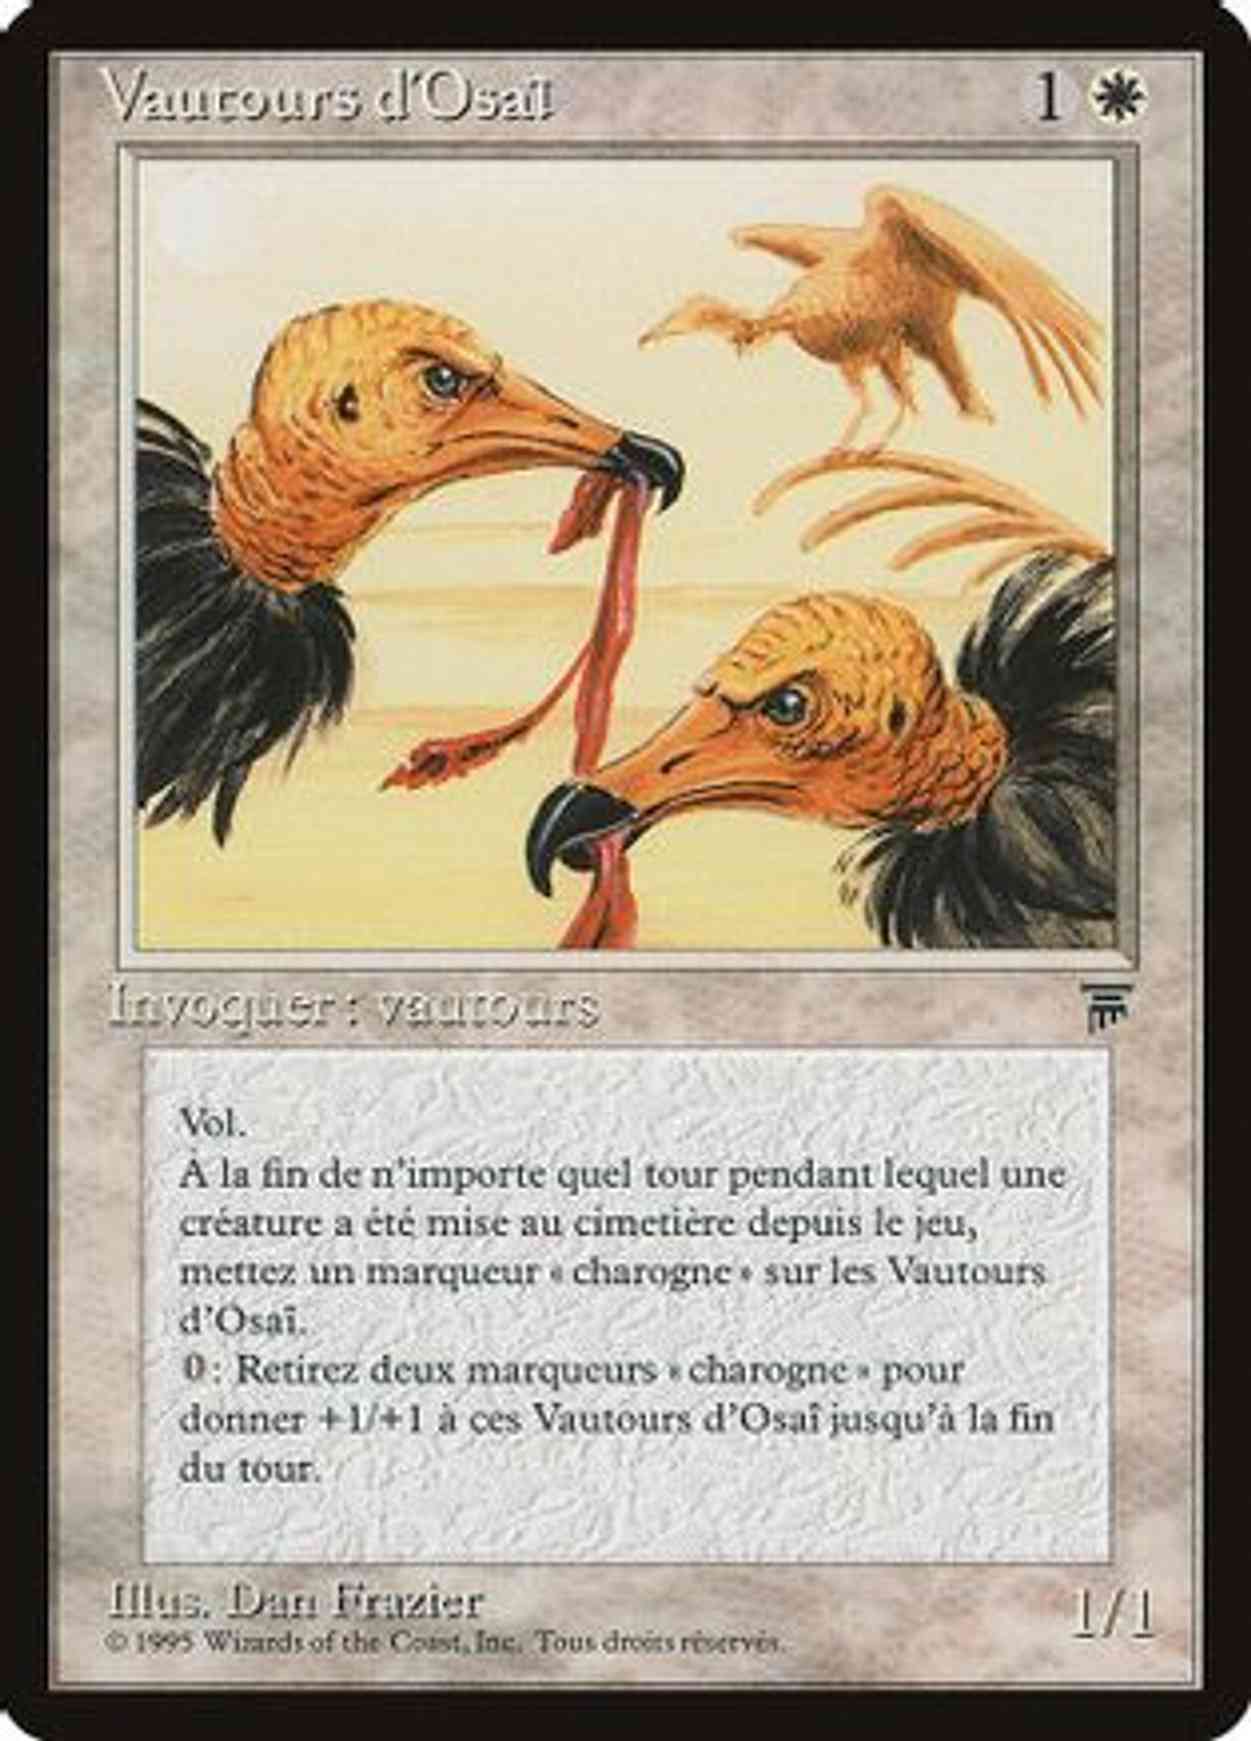 Osai Vultures (French) - "Vautours d'Osai" magic card front